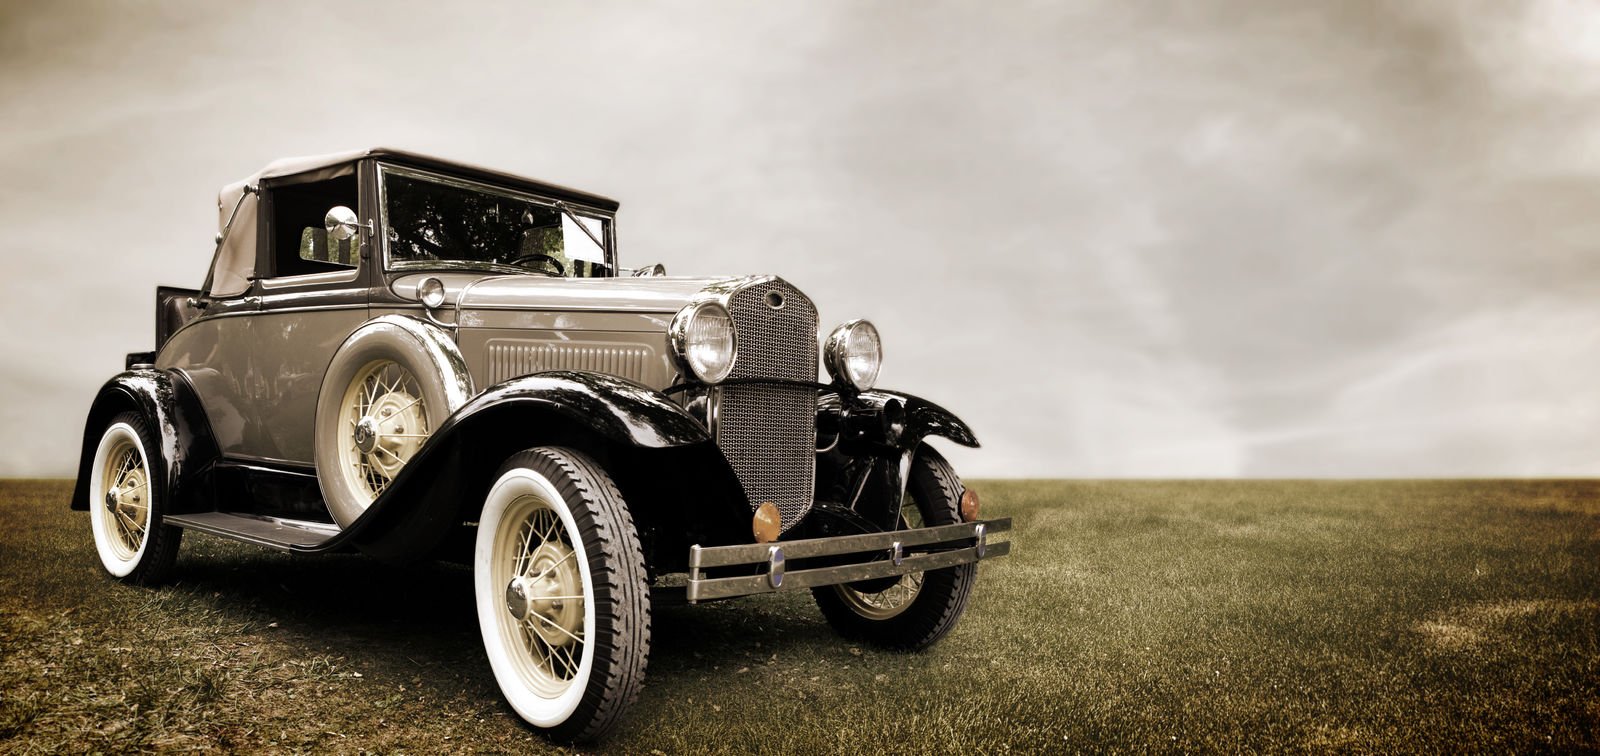 Car Insurance for Antique Cars